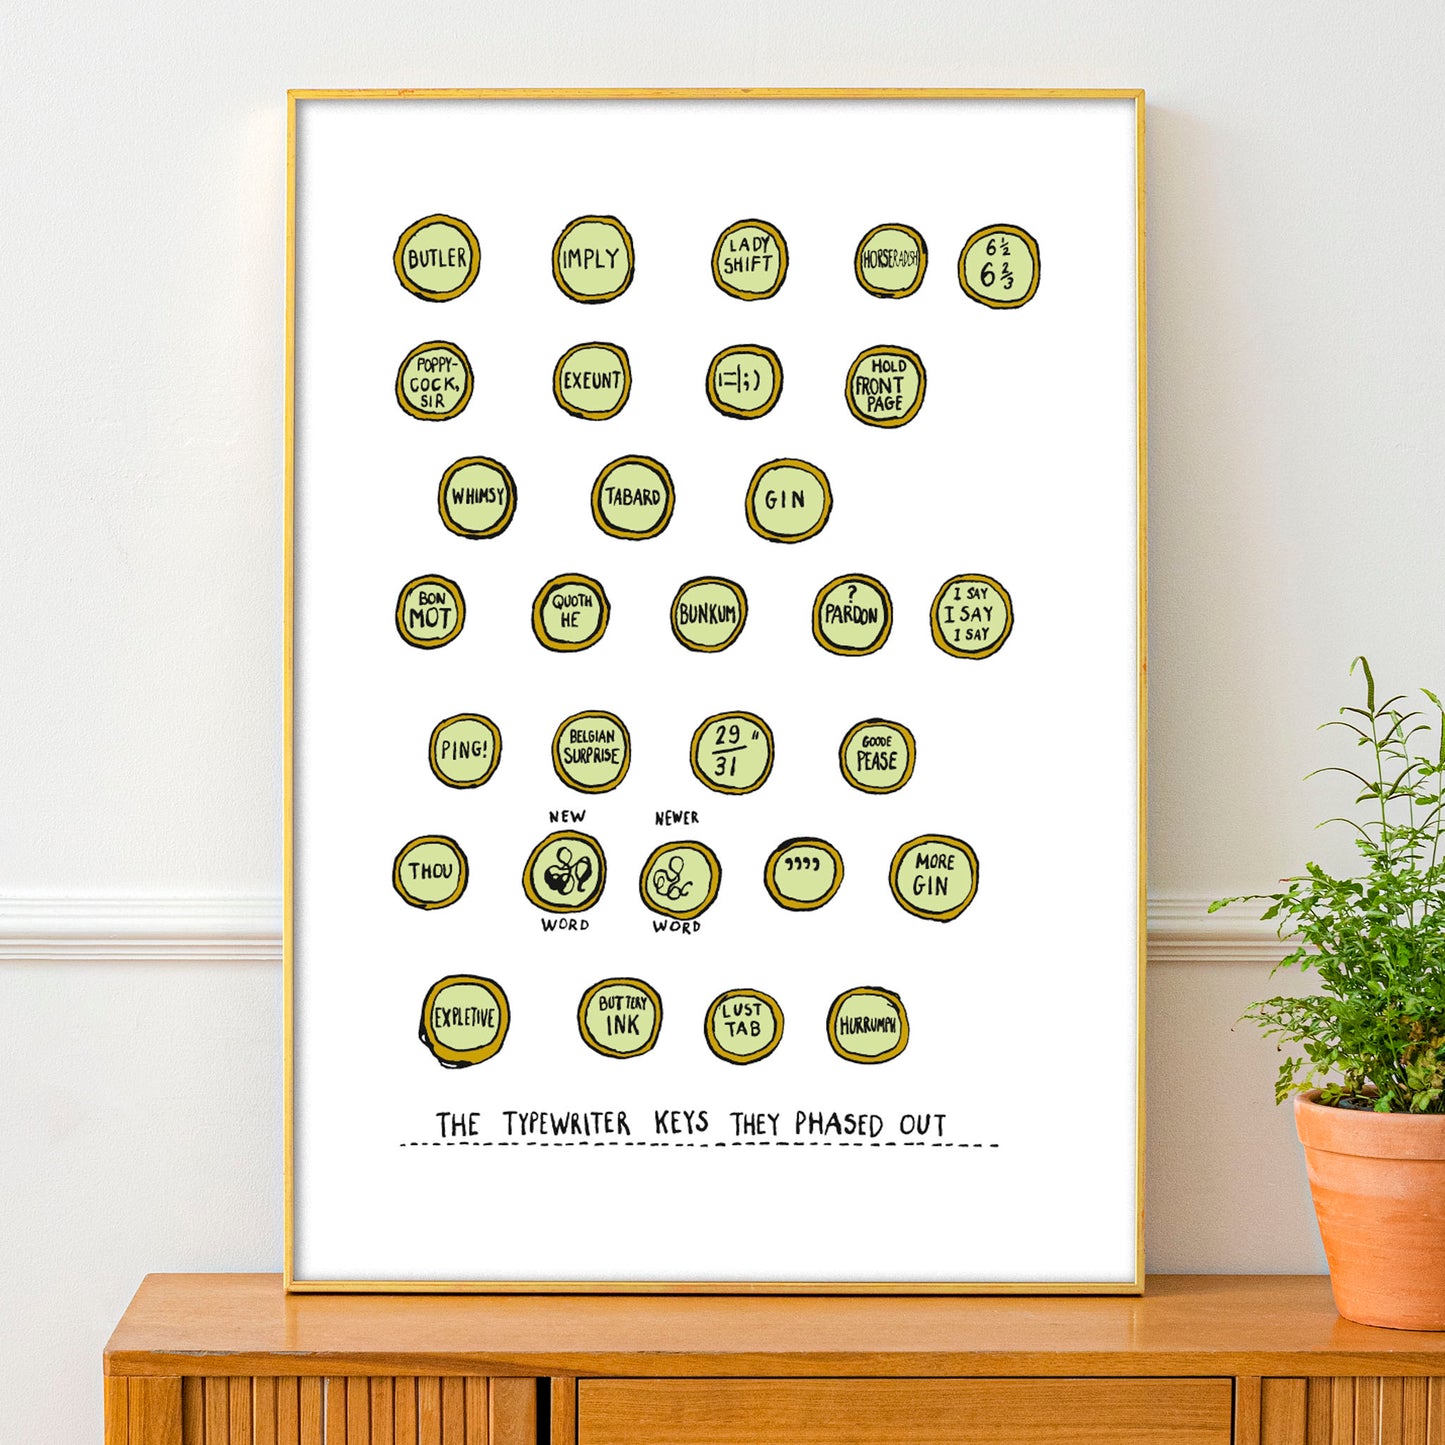 The Typewriter Keys They Phased Out Poster Print